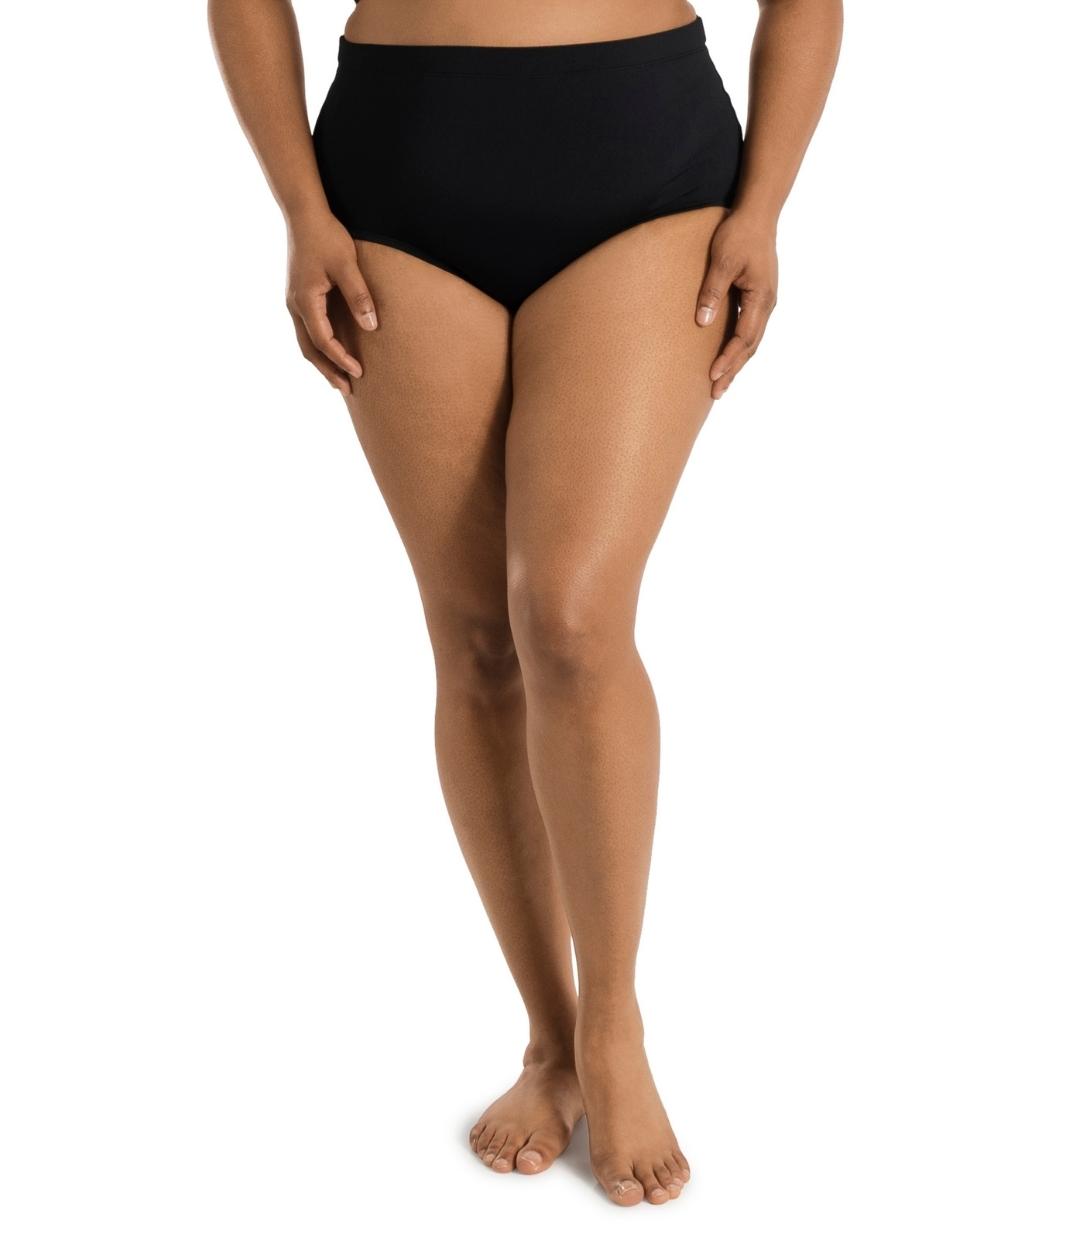 Plus size woman, front view, wearing AquaSport Swim Brief Black. Conservative leg opening and full bottom coverage. 